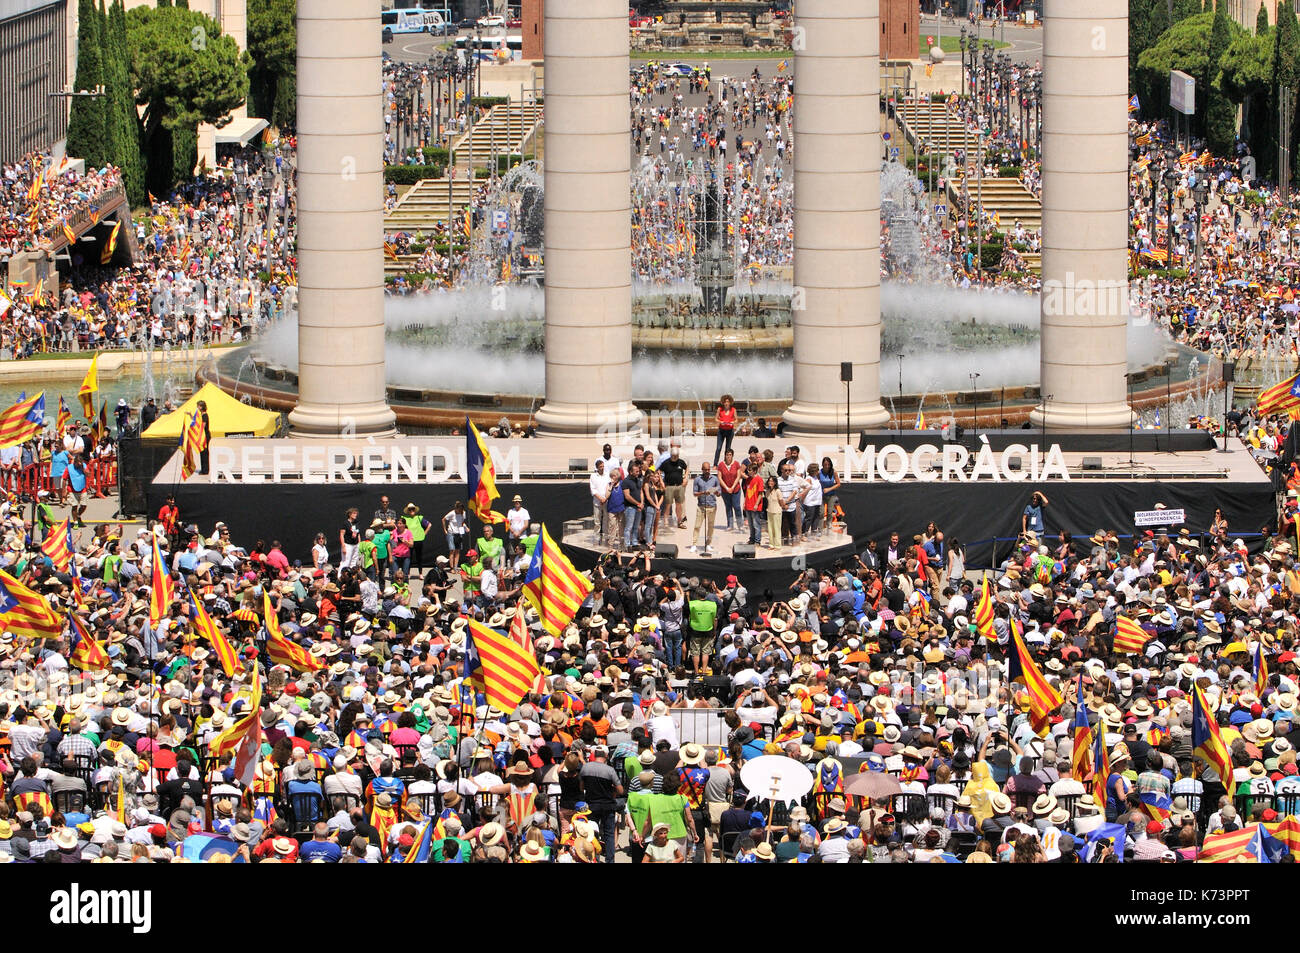 Political demonstration for the independence of Catalonia. June 2017, Montjuic, Barcelona, Catalonia, Spain Stock Photo